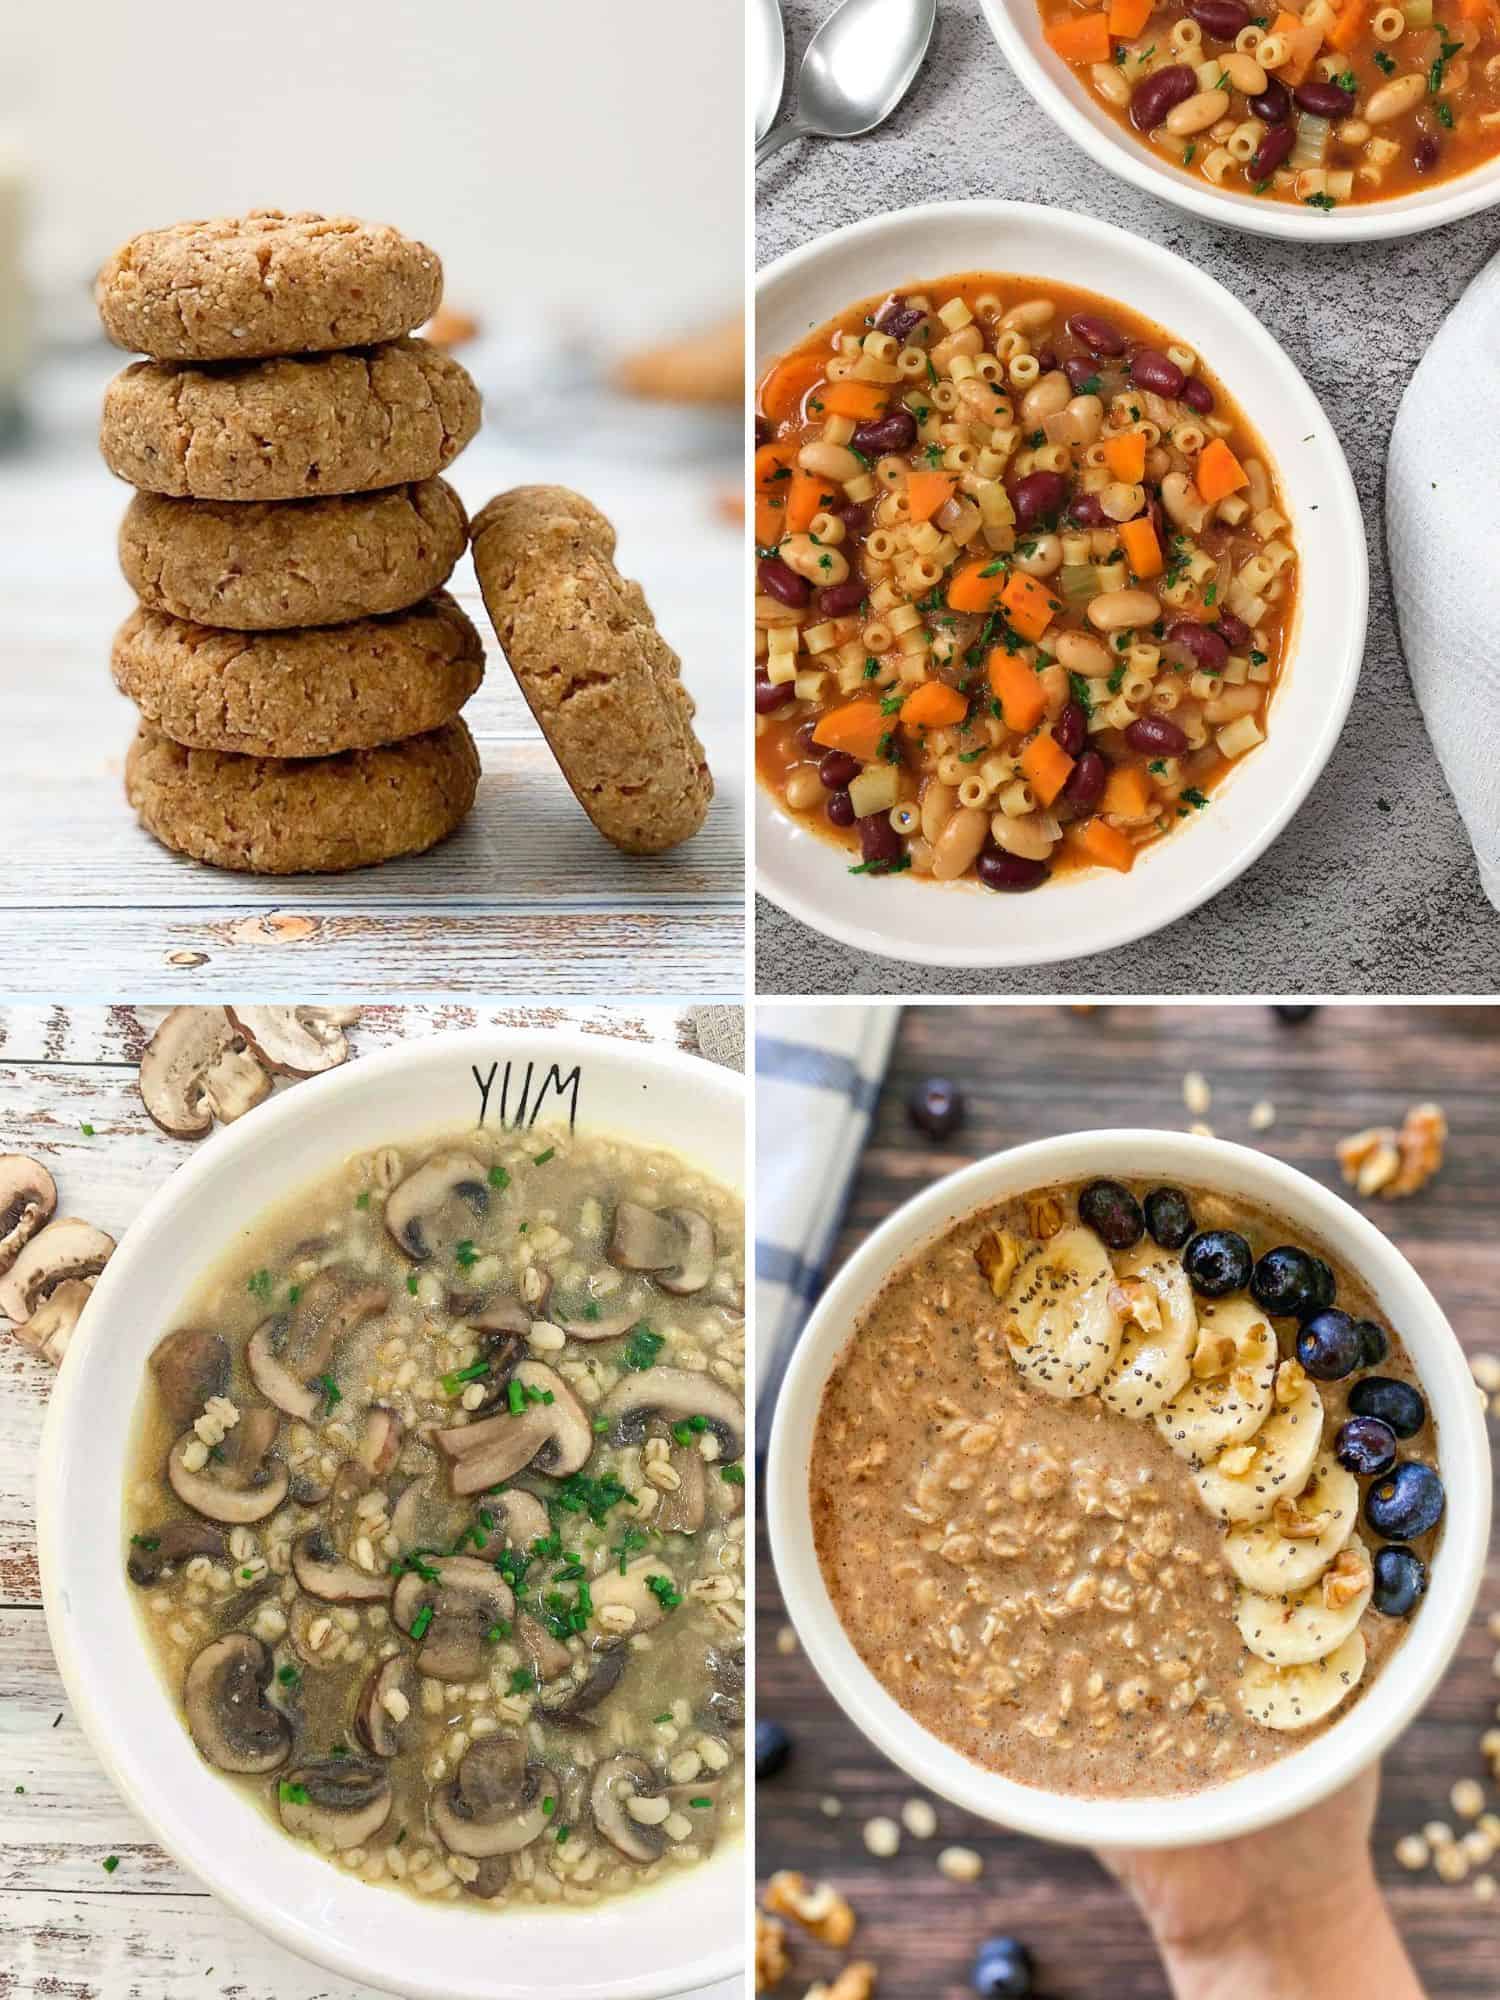 Collage of 4 food images: cookies, stew, soup, oatmeal.